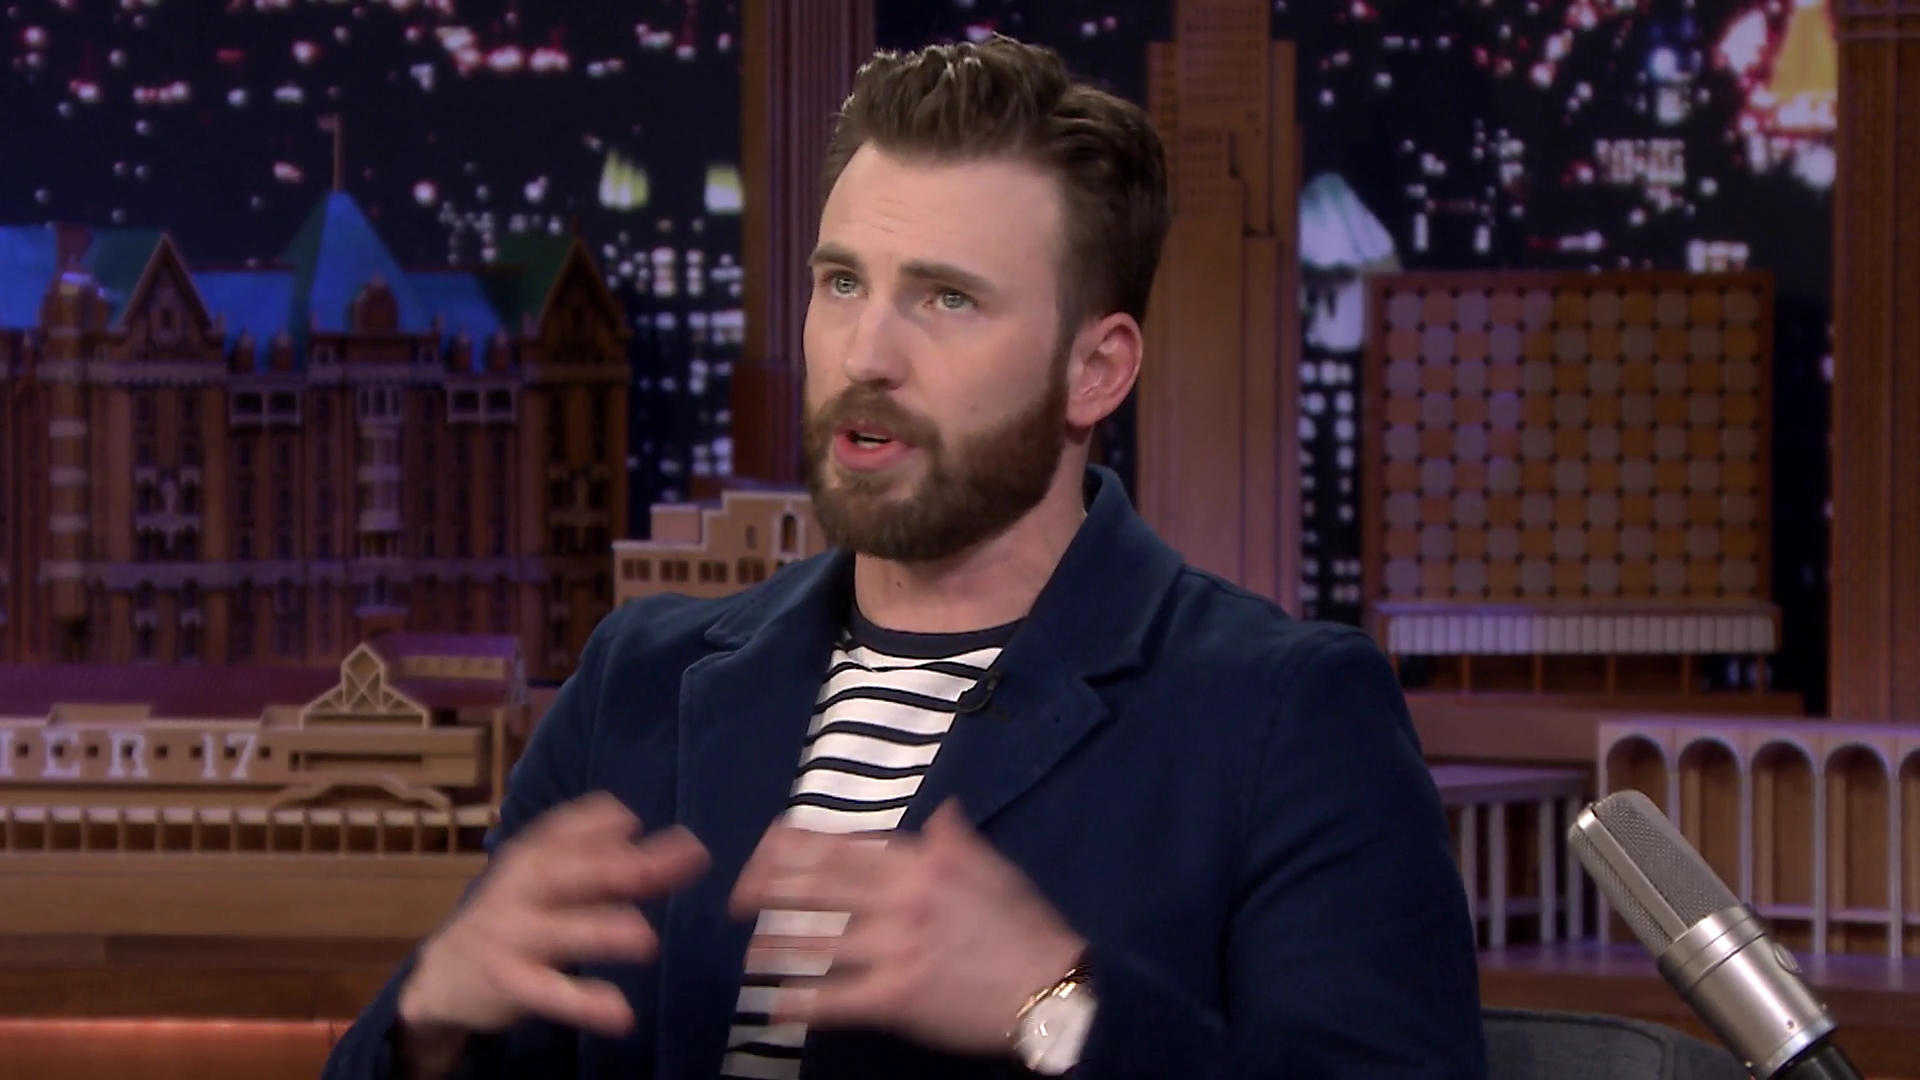 Chris Stops by ‘Late Night with Jimmy Fallon’